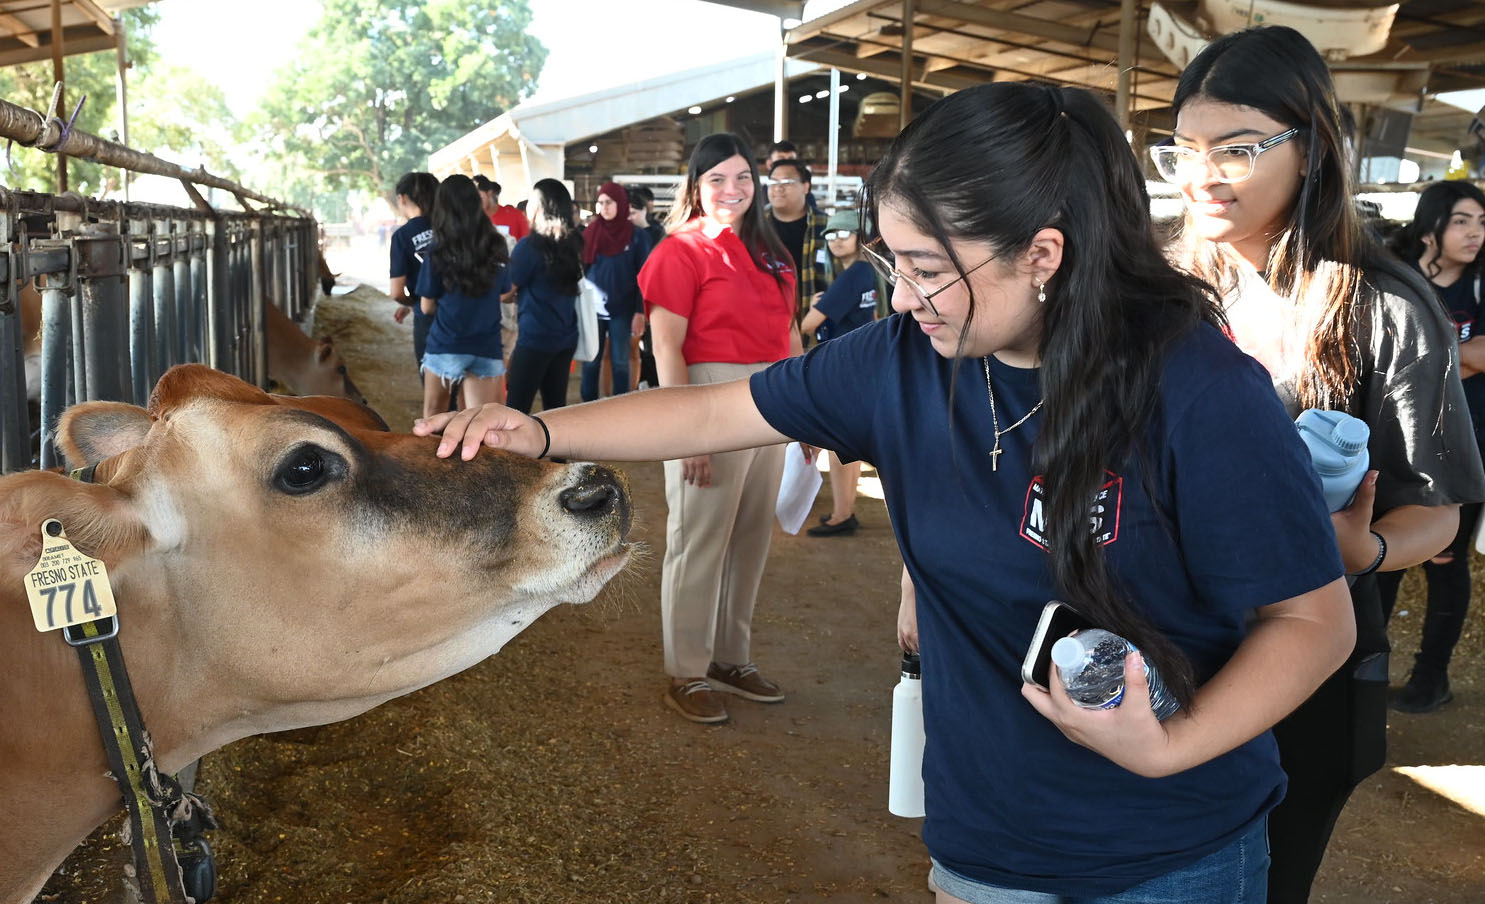 The public is invited to take farm tours that include our dairy and livestock units at the Jordan CollegeOpen House.